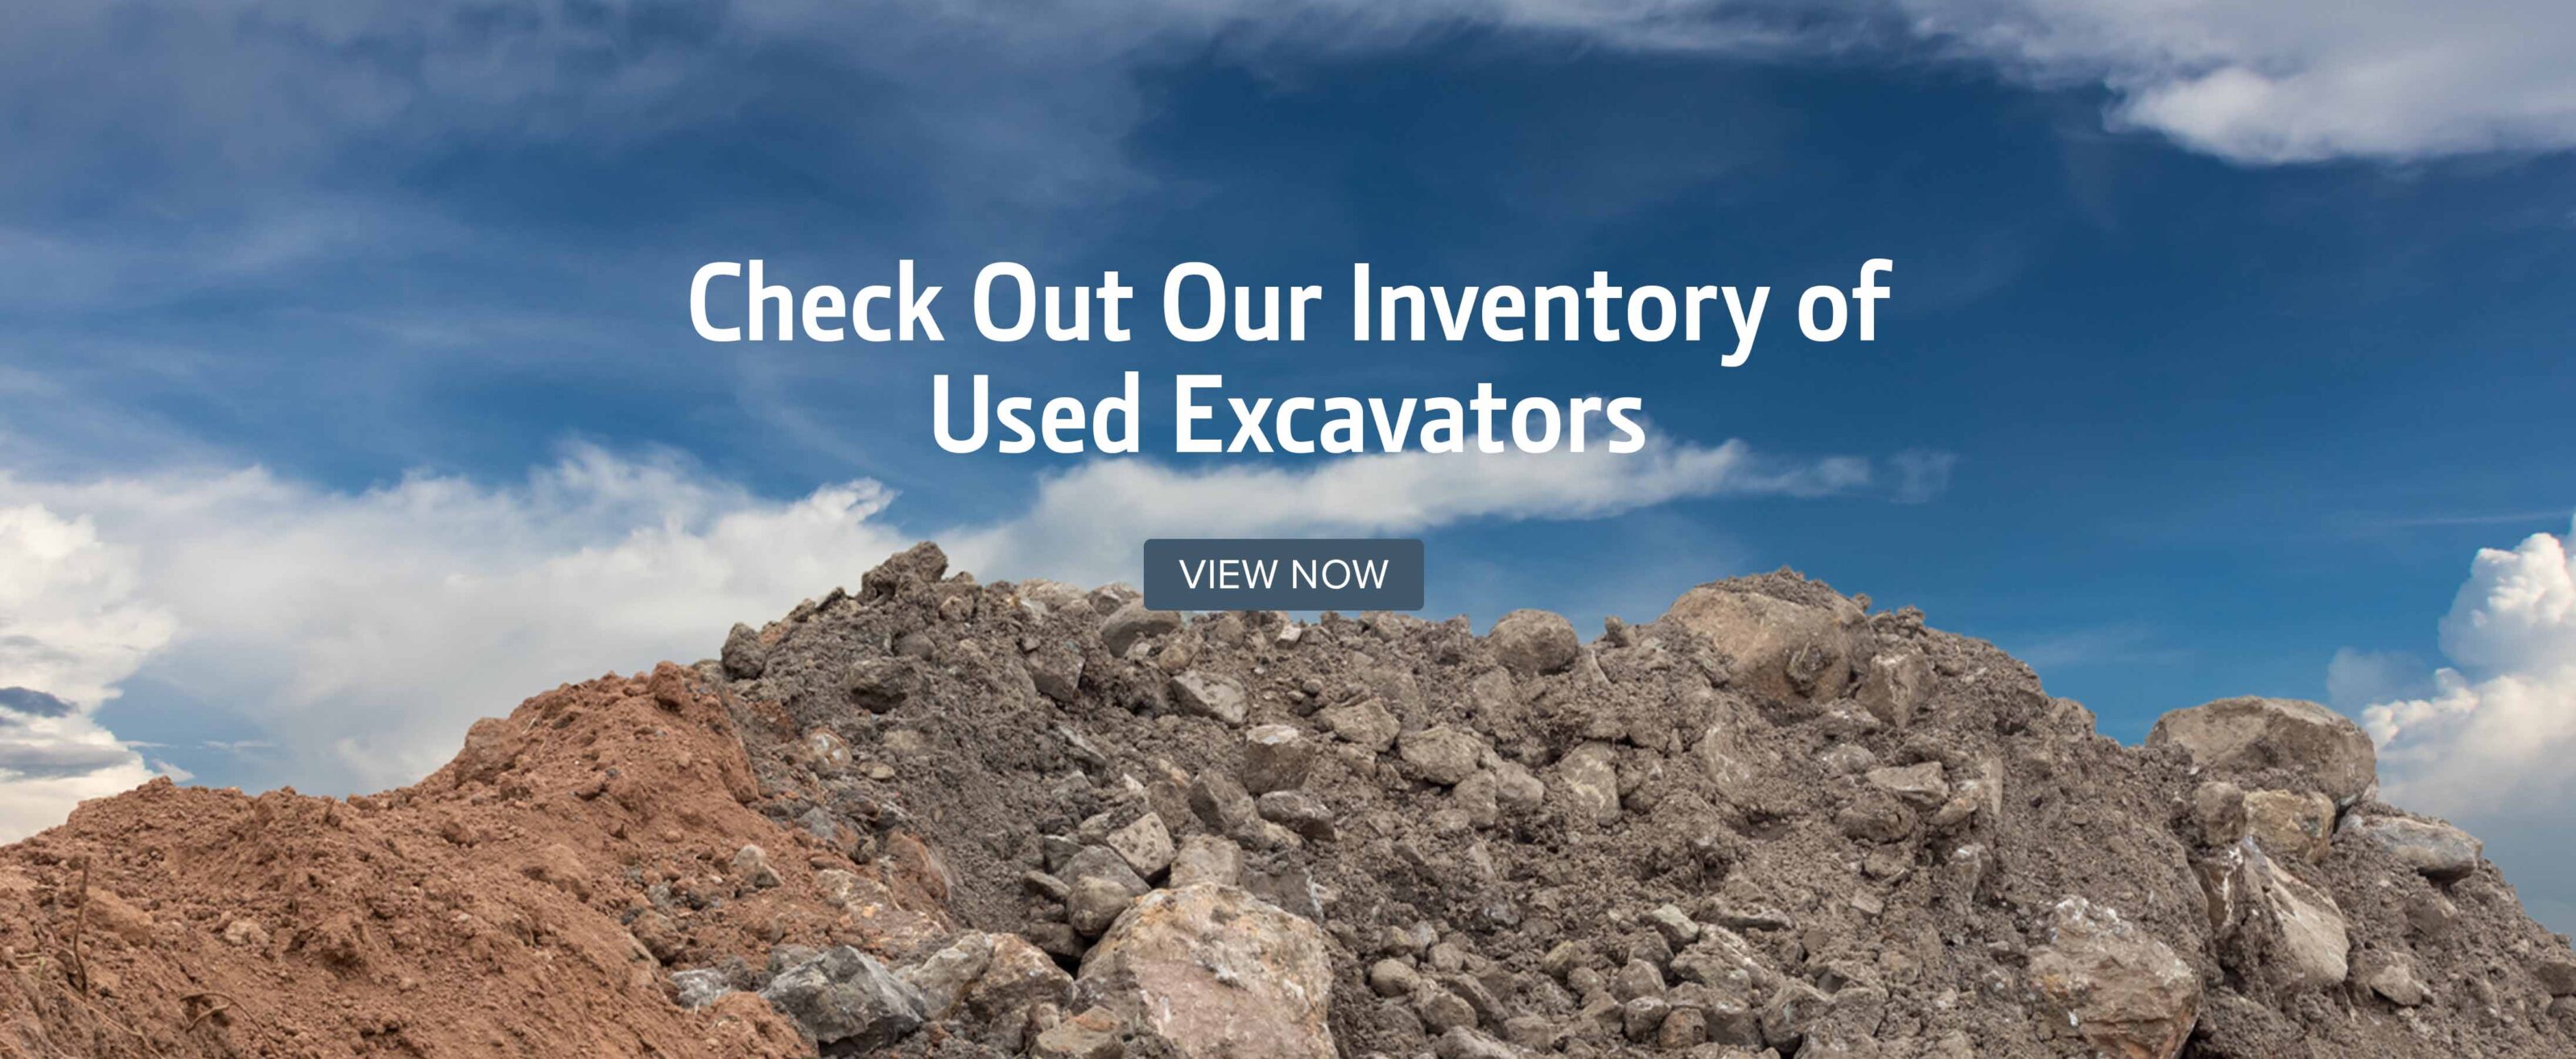 Check Out Our Inventory of Used Excavators